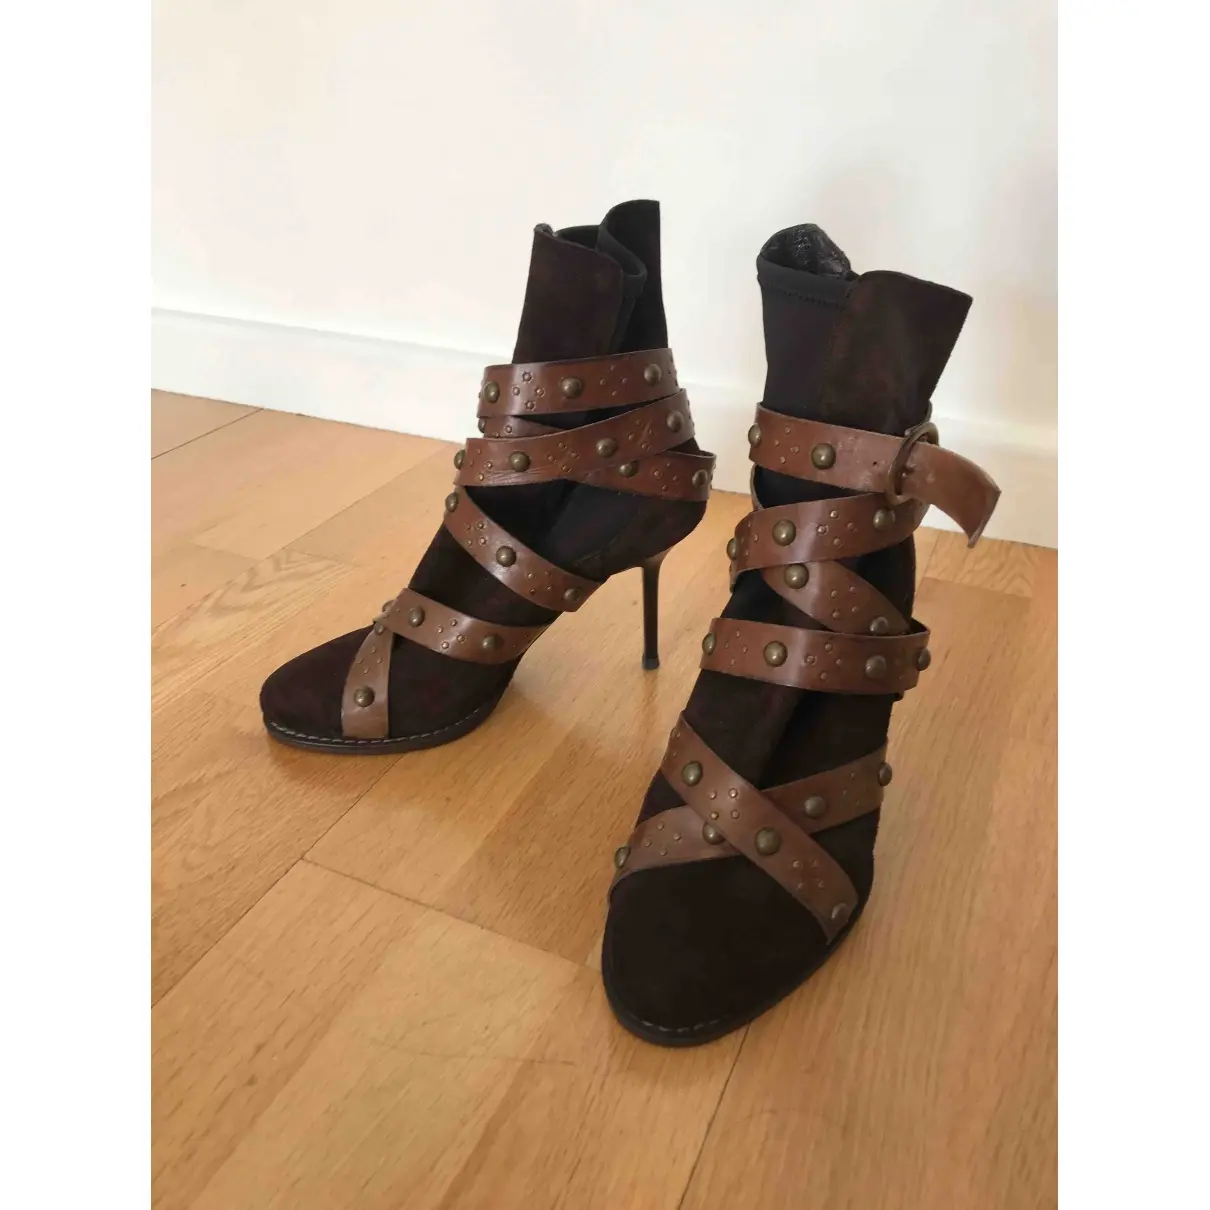 Gianmarco Lorenzi Leather buckled boots for sale